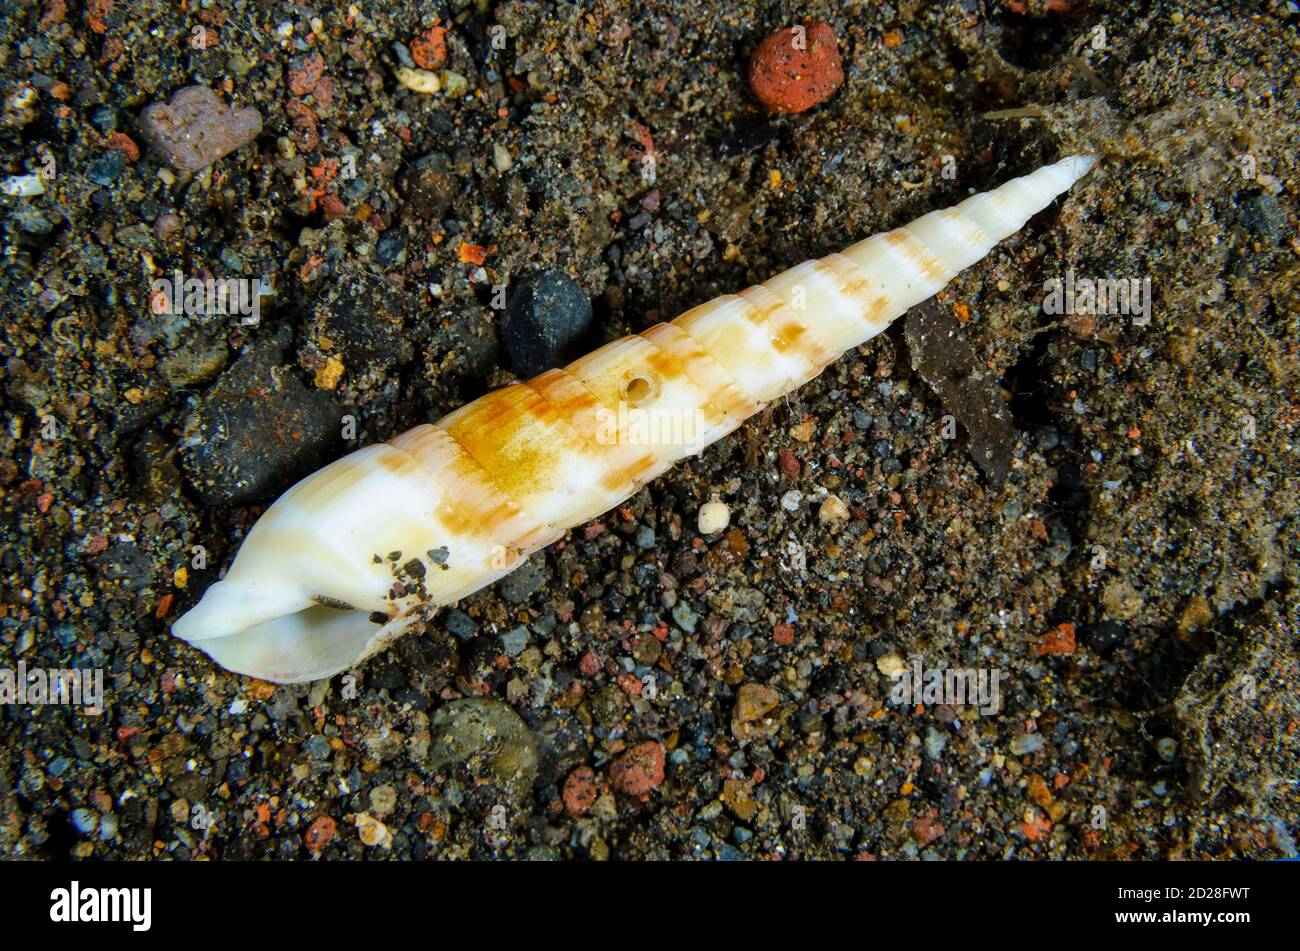 Auger Shell, Terebra sp, with hole from carnivorous gastropod, Ghost Bay dive site, Amed, Bali, Indonesia, Indian Ocean Stock Photo